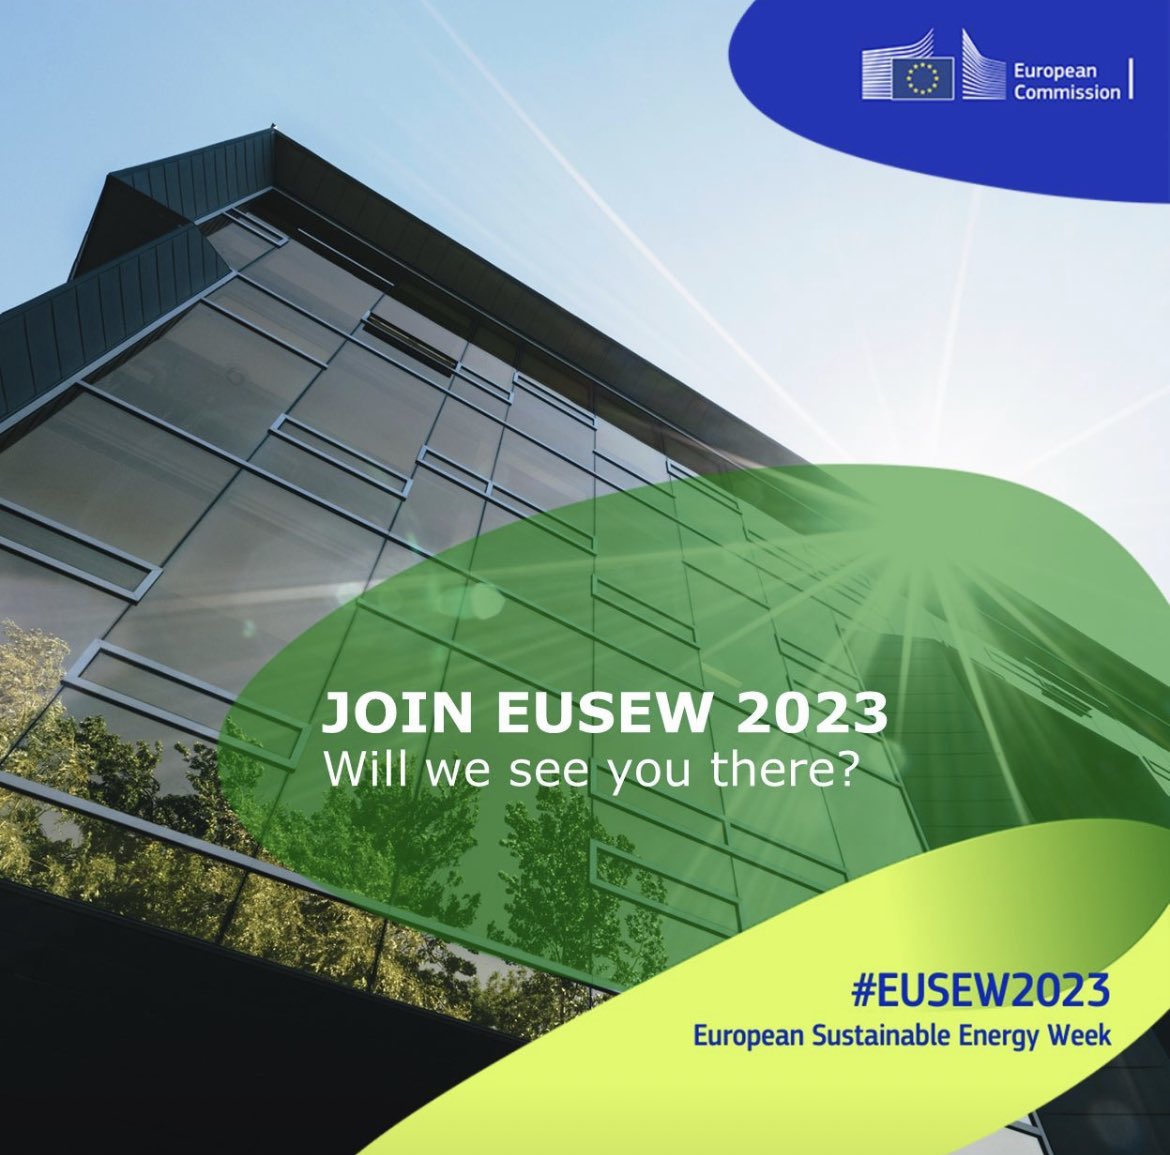 🌍  Let's meet at #EUSEW2023! 🙌 This is my first time attending EUSEW in person since 2019, and I couldn't be more excited. 🎉

Please feel free to contact me if you want to drink a coffee, discuss collaboration opportunities, or invite me to listen to your roundtable 😉